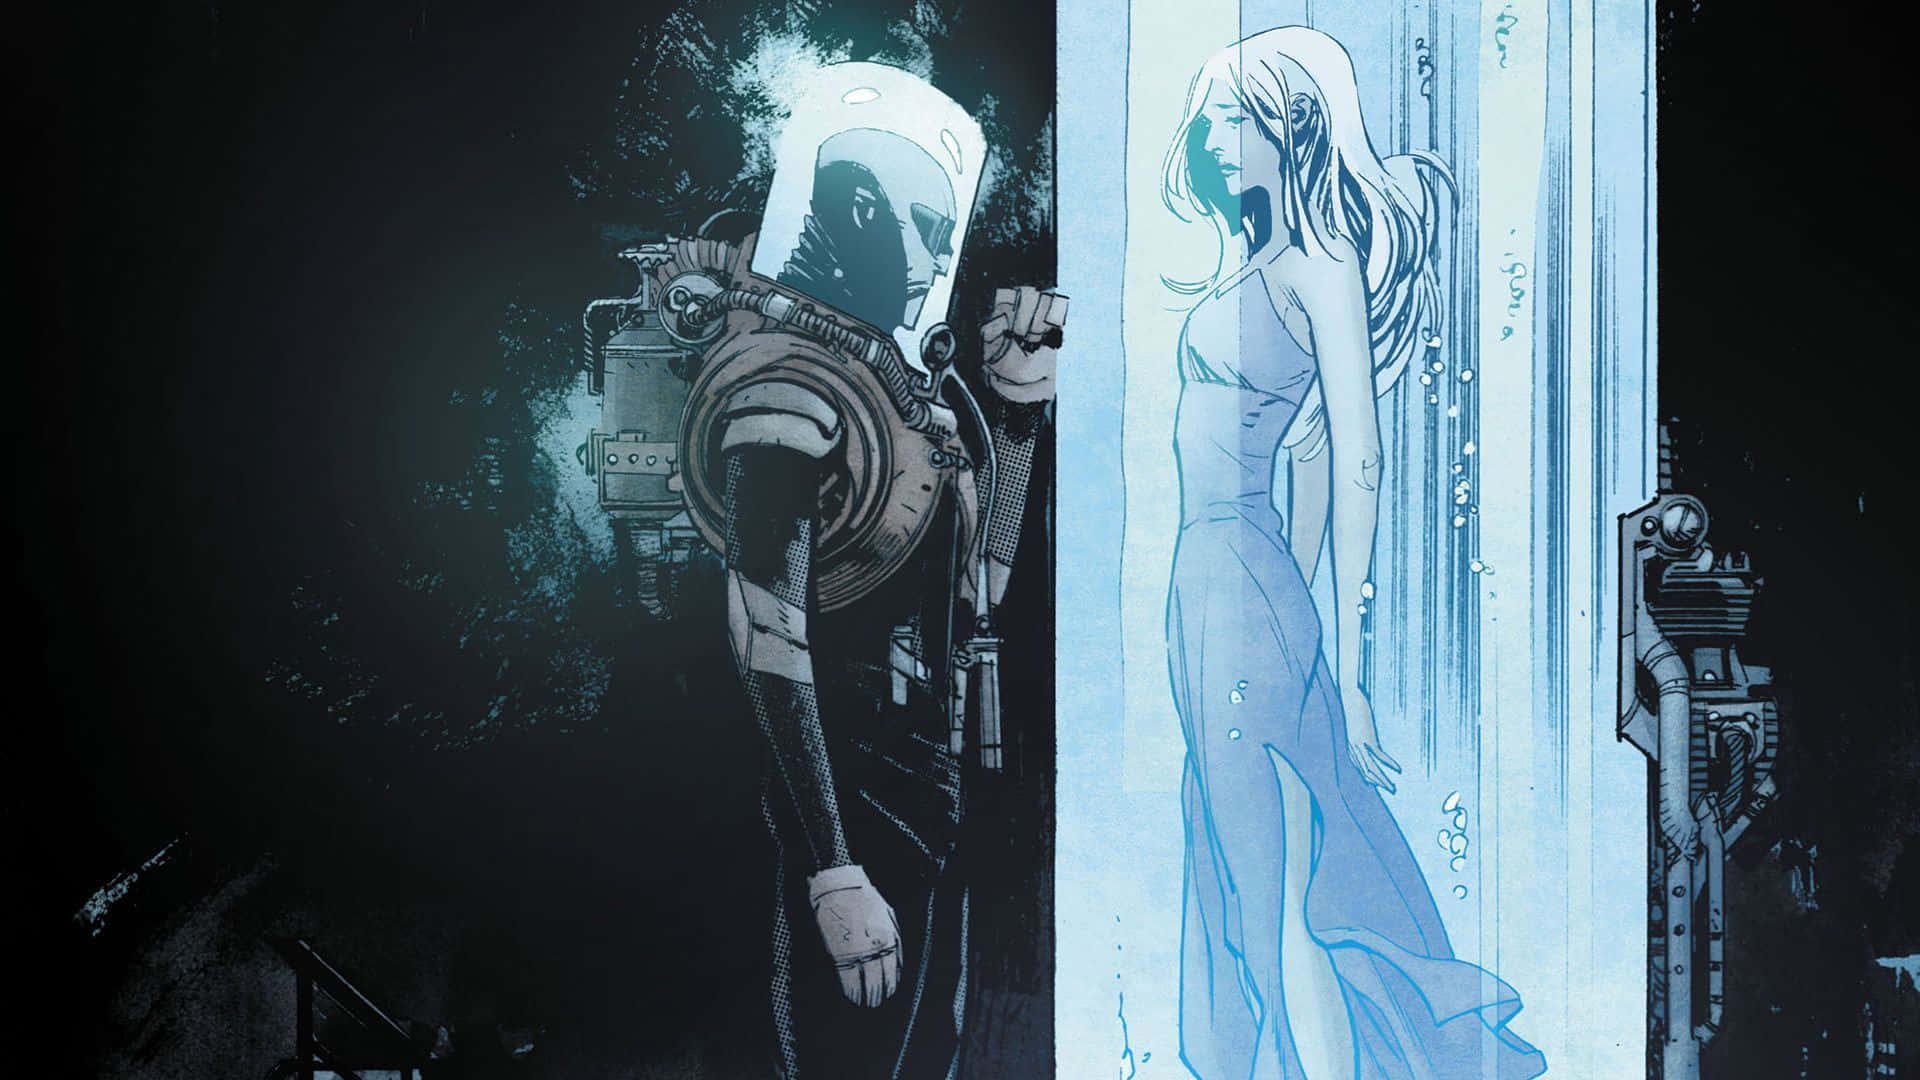 Mr. Freeze Dominating The Scene In A Chilling Pose Background